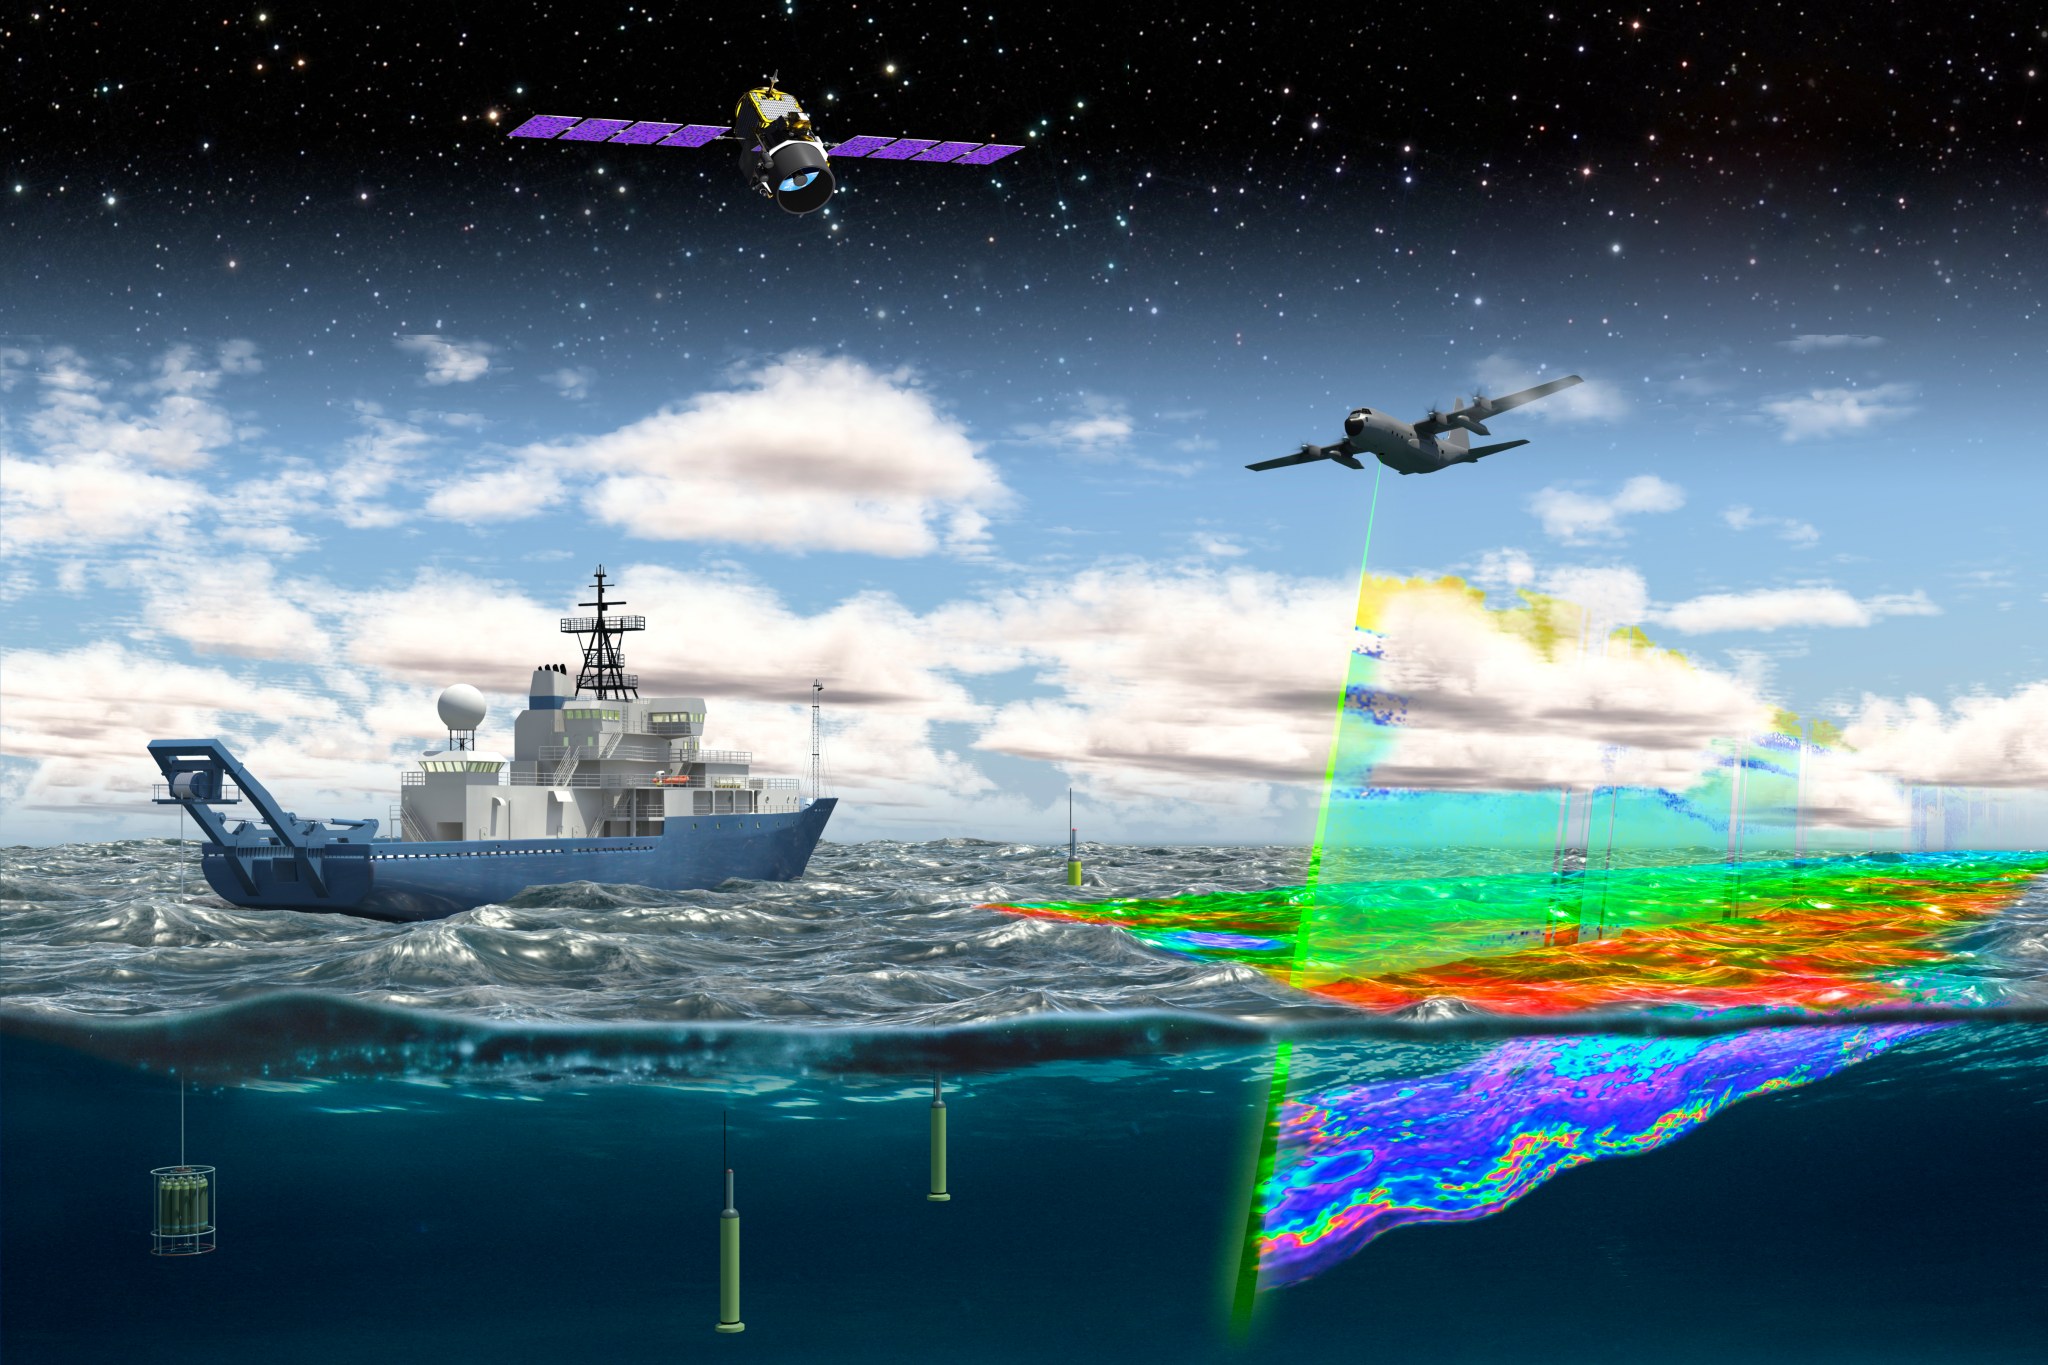 The North Atlantic Aerosols and Marine Ecosystems Study (NAAMES) is looking at the complex relationship between ocean and atmosphere. The mission, which involves space-, ship- and aircraft-based measurements, is using Langley's High Spectral Resolution Lidar to measure aerosols, clouds and ocean properties.